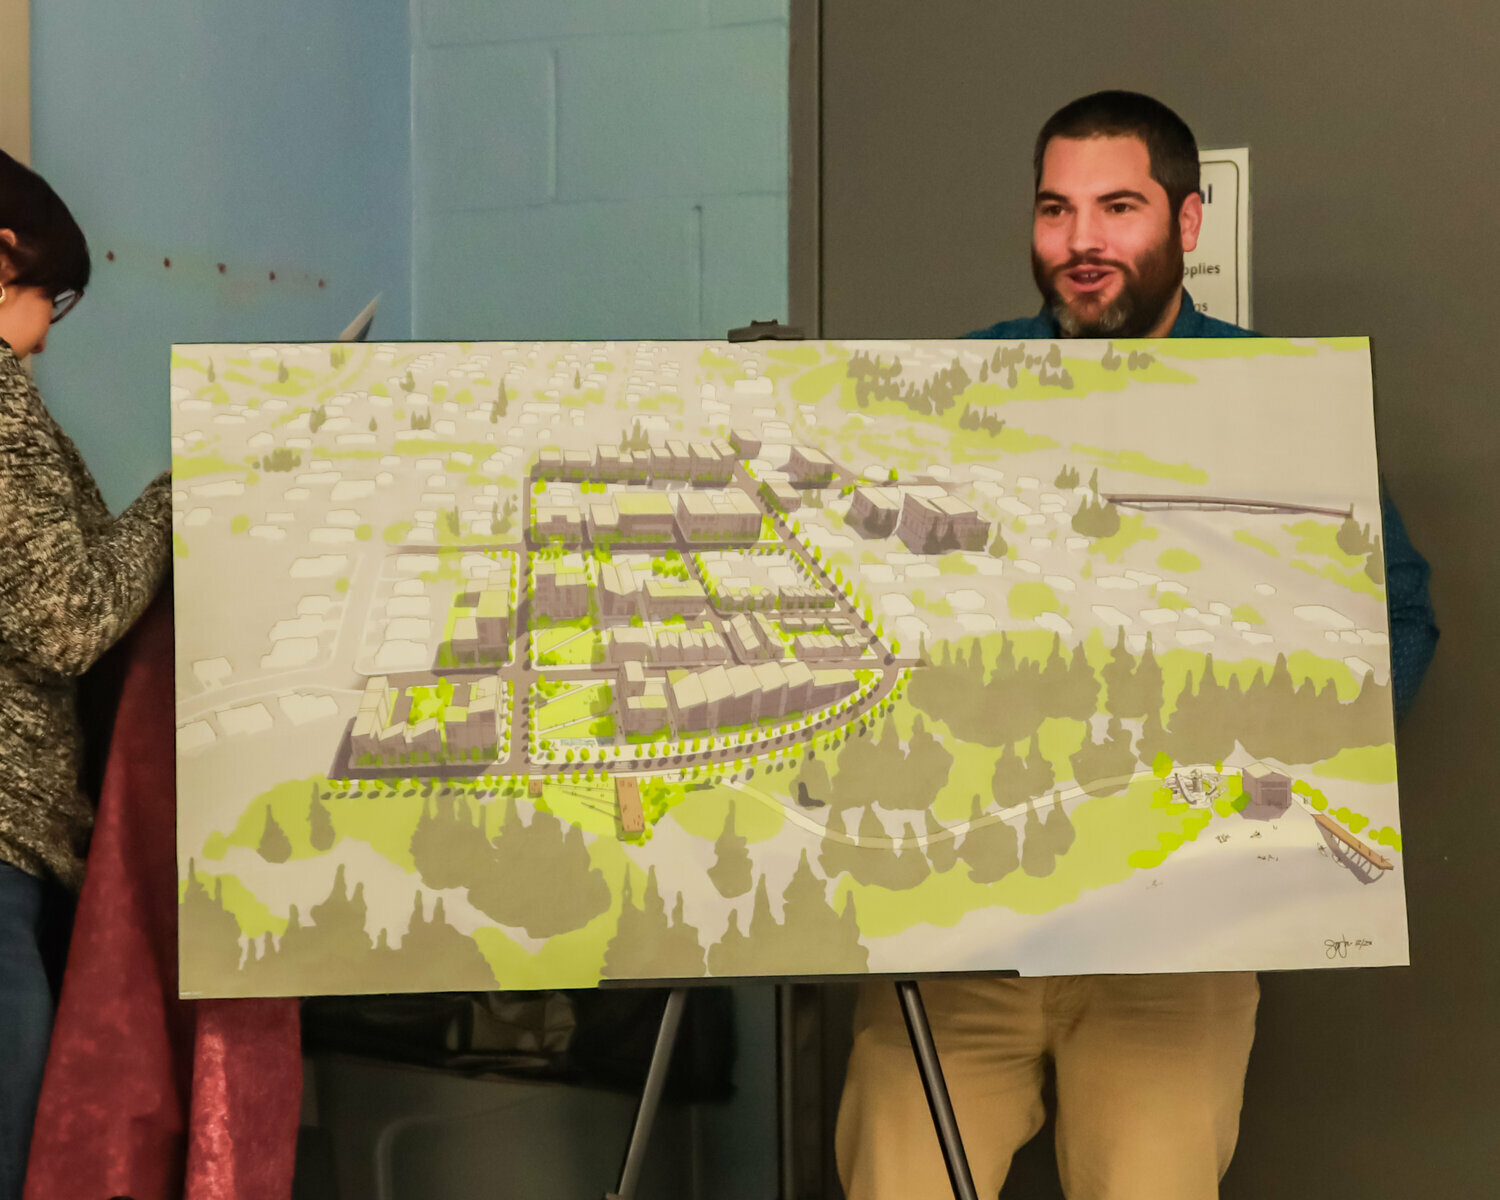 Bryan Kast, La Center public works and community development director, unveils the preliminary vision for the La Center downtown expansion at a City Council retreat on Saturday, Dec. 16.